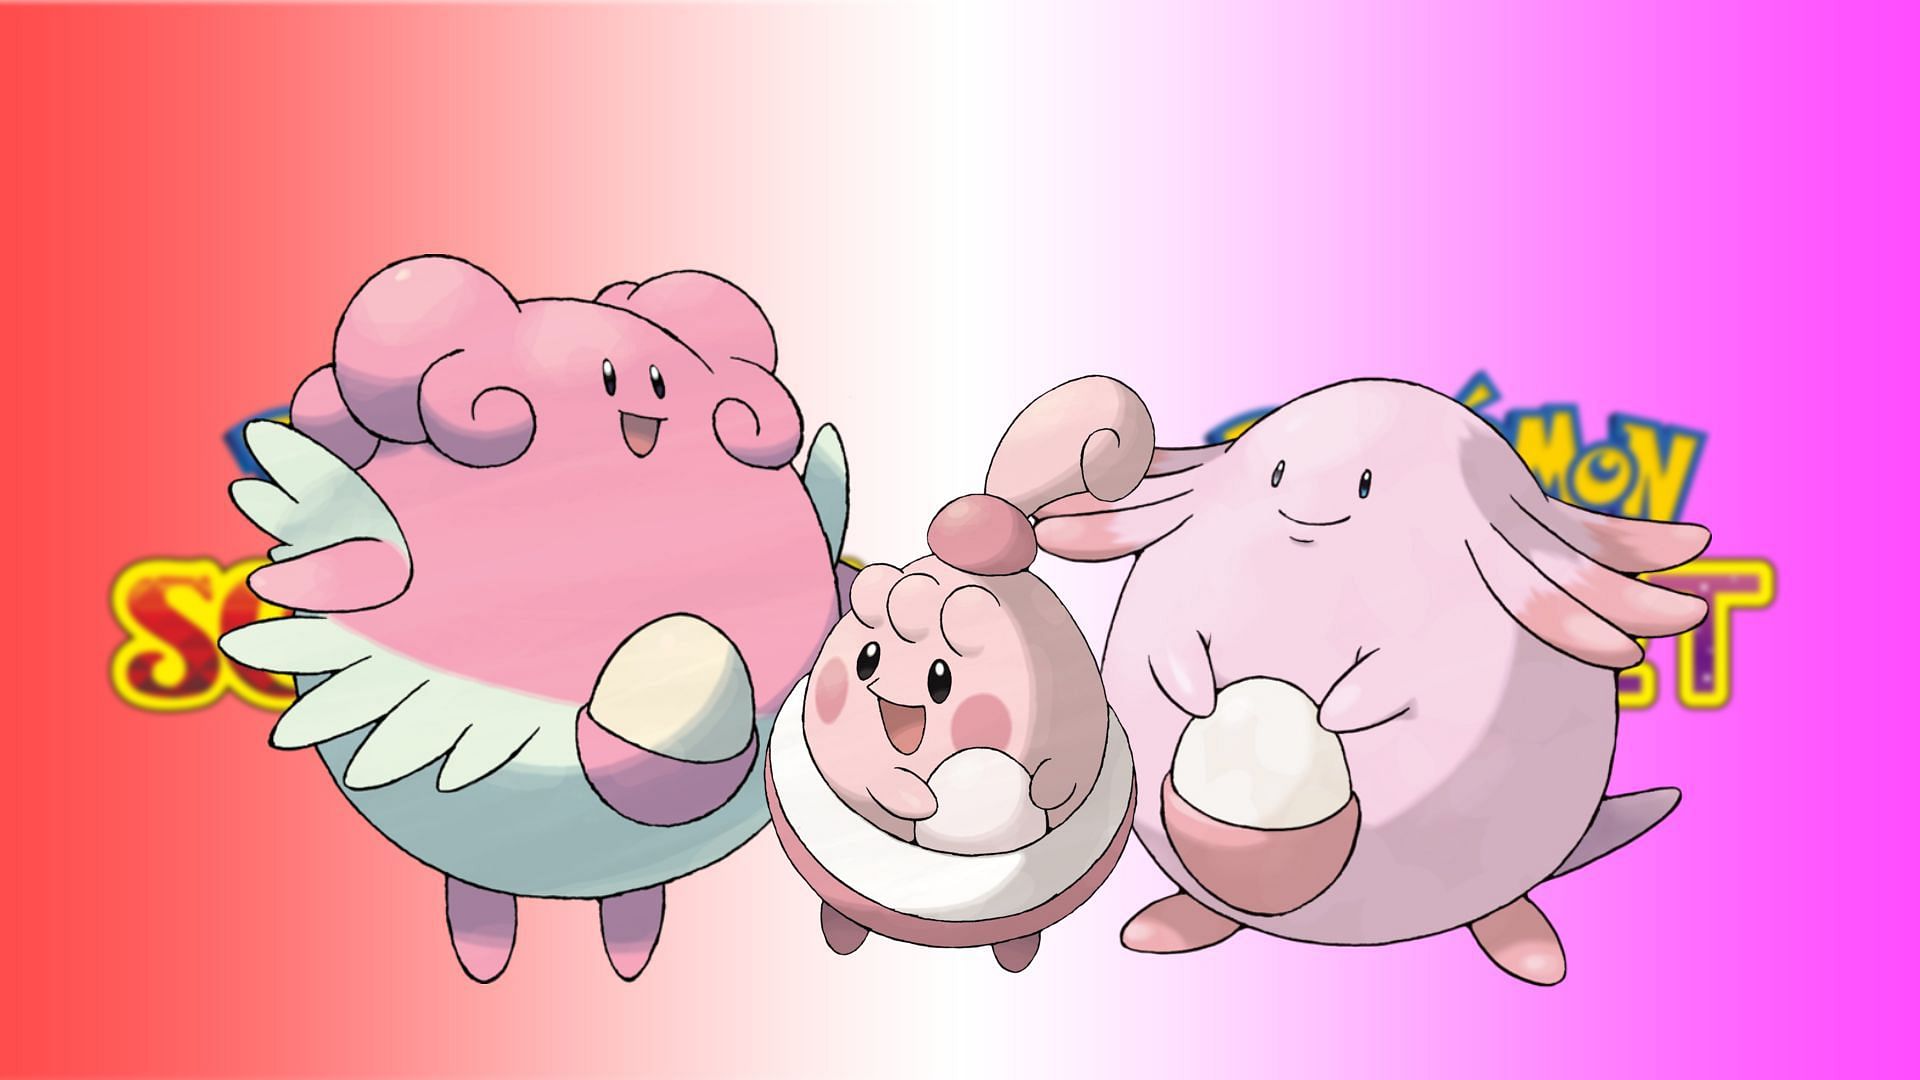 Catching Happiny, Chansey and Blissey (Image via Pokemon Scarlet and Violet)